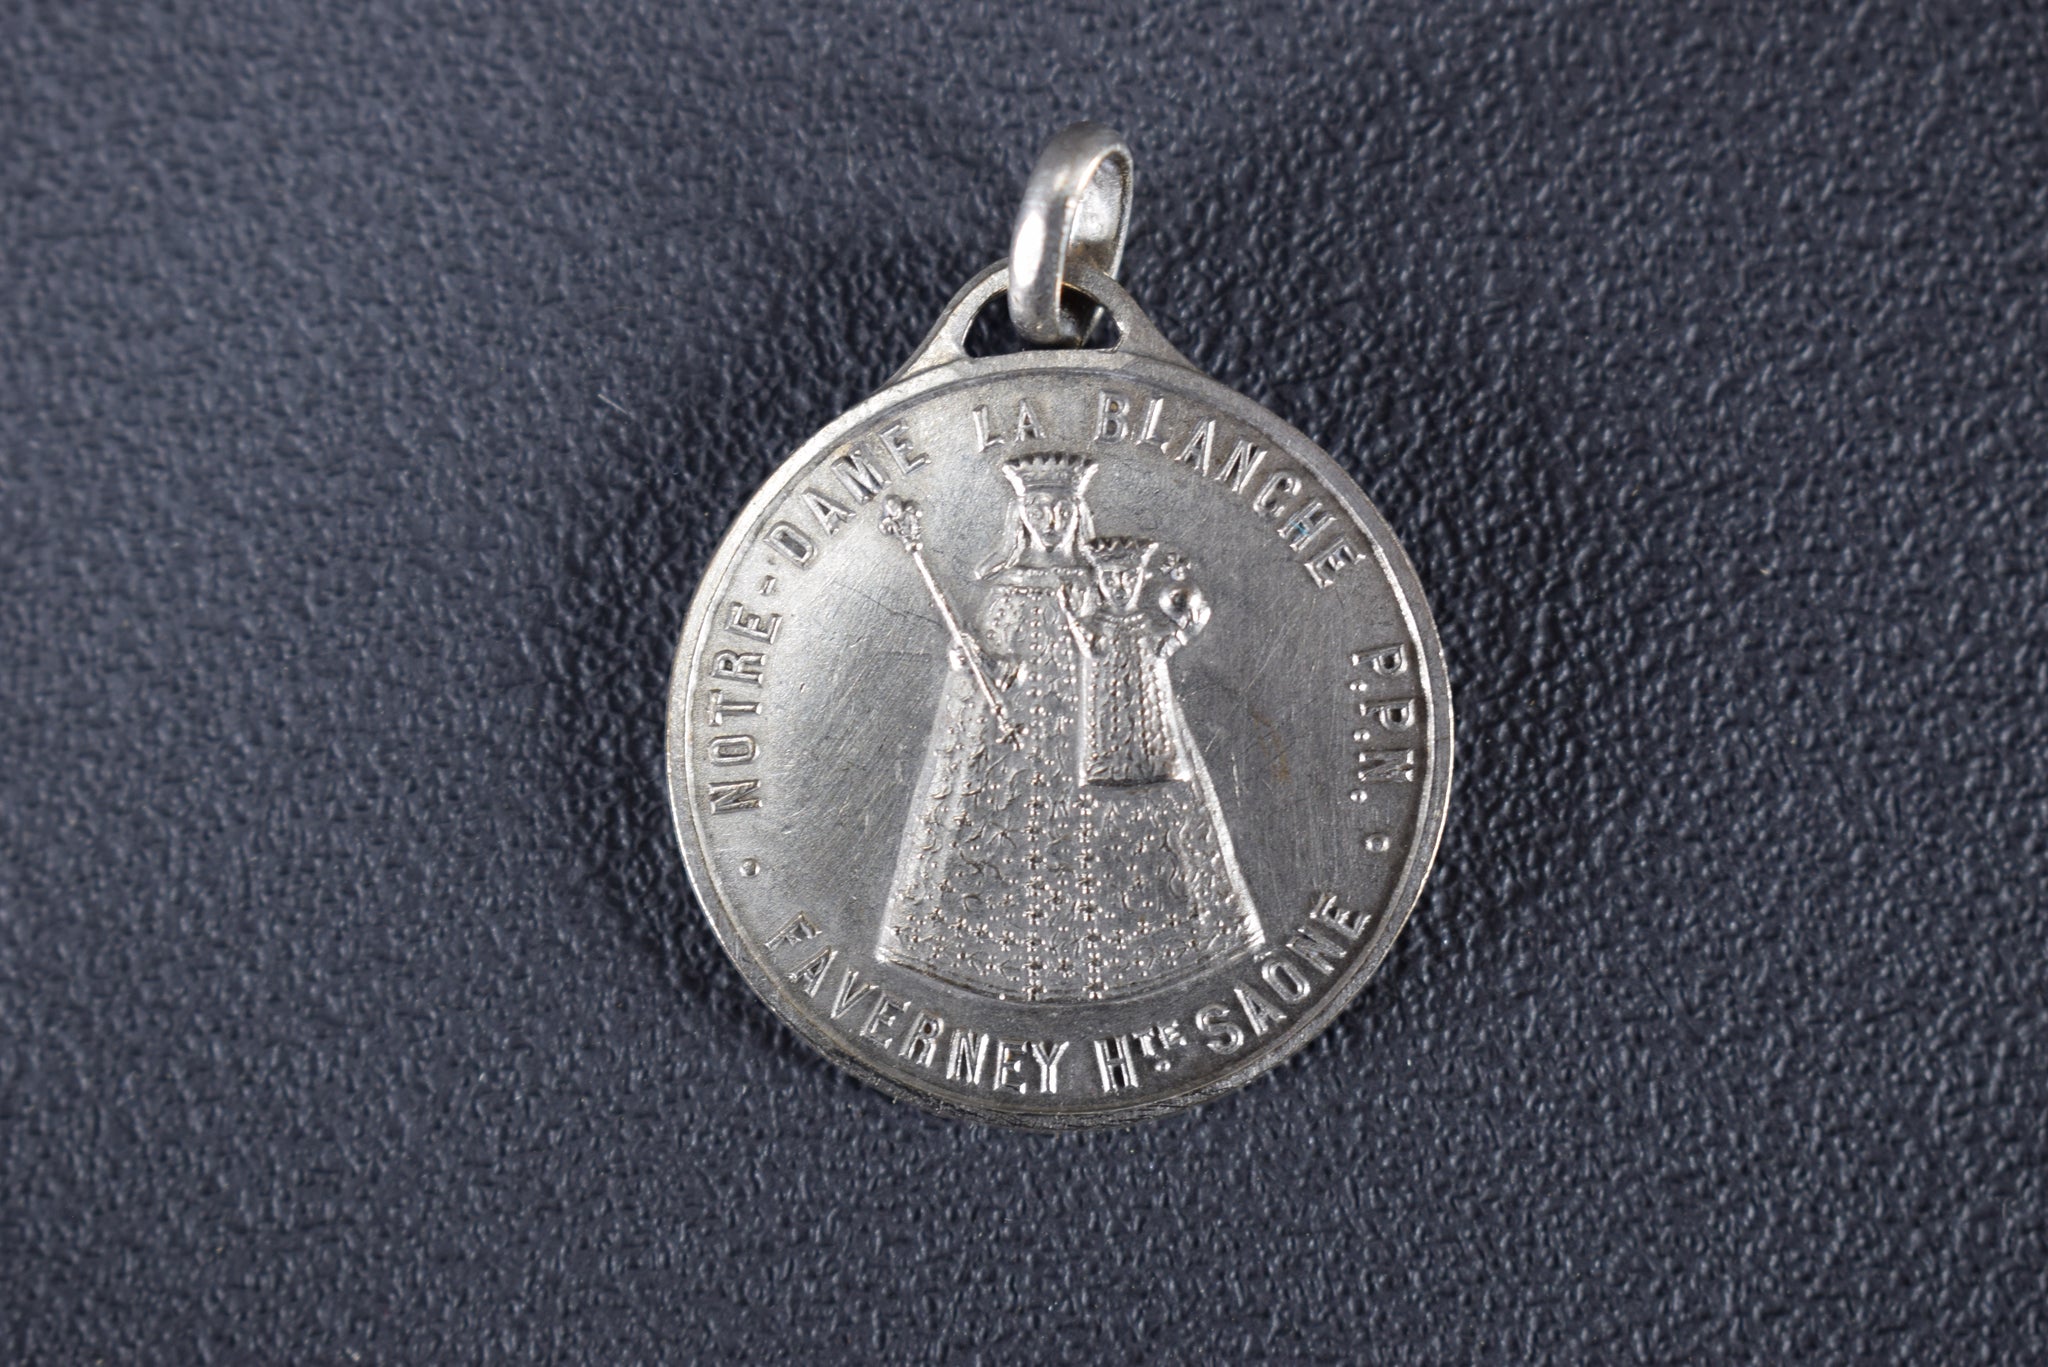 Faverney Miracle medal